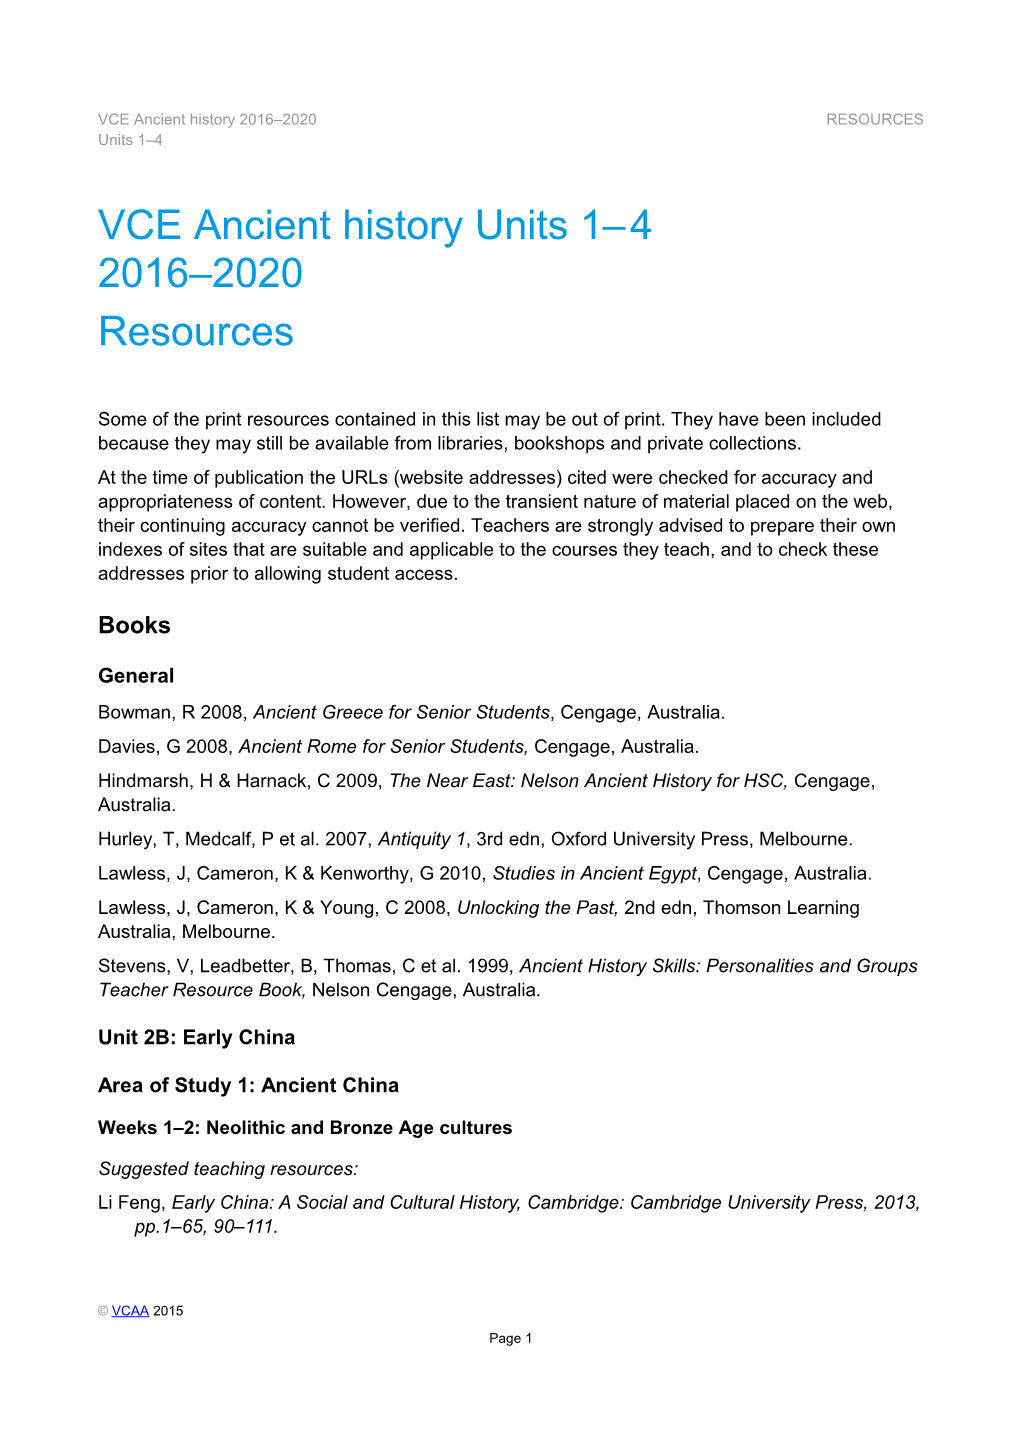 VCE Ancient History 2016 2020